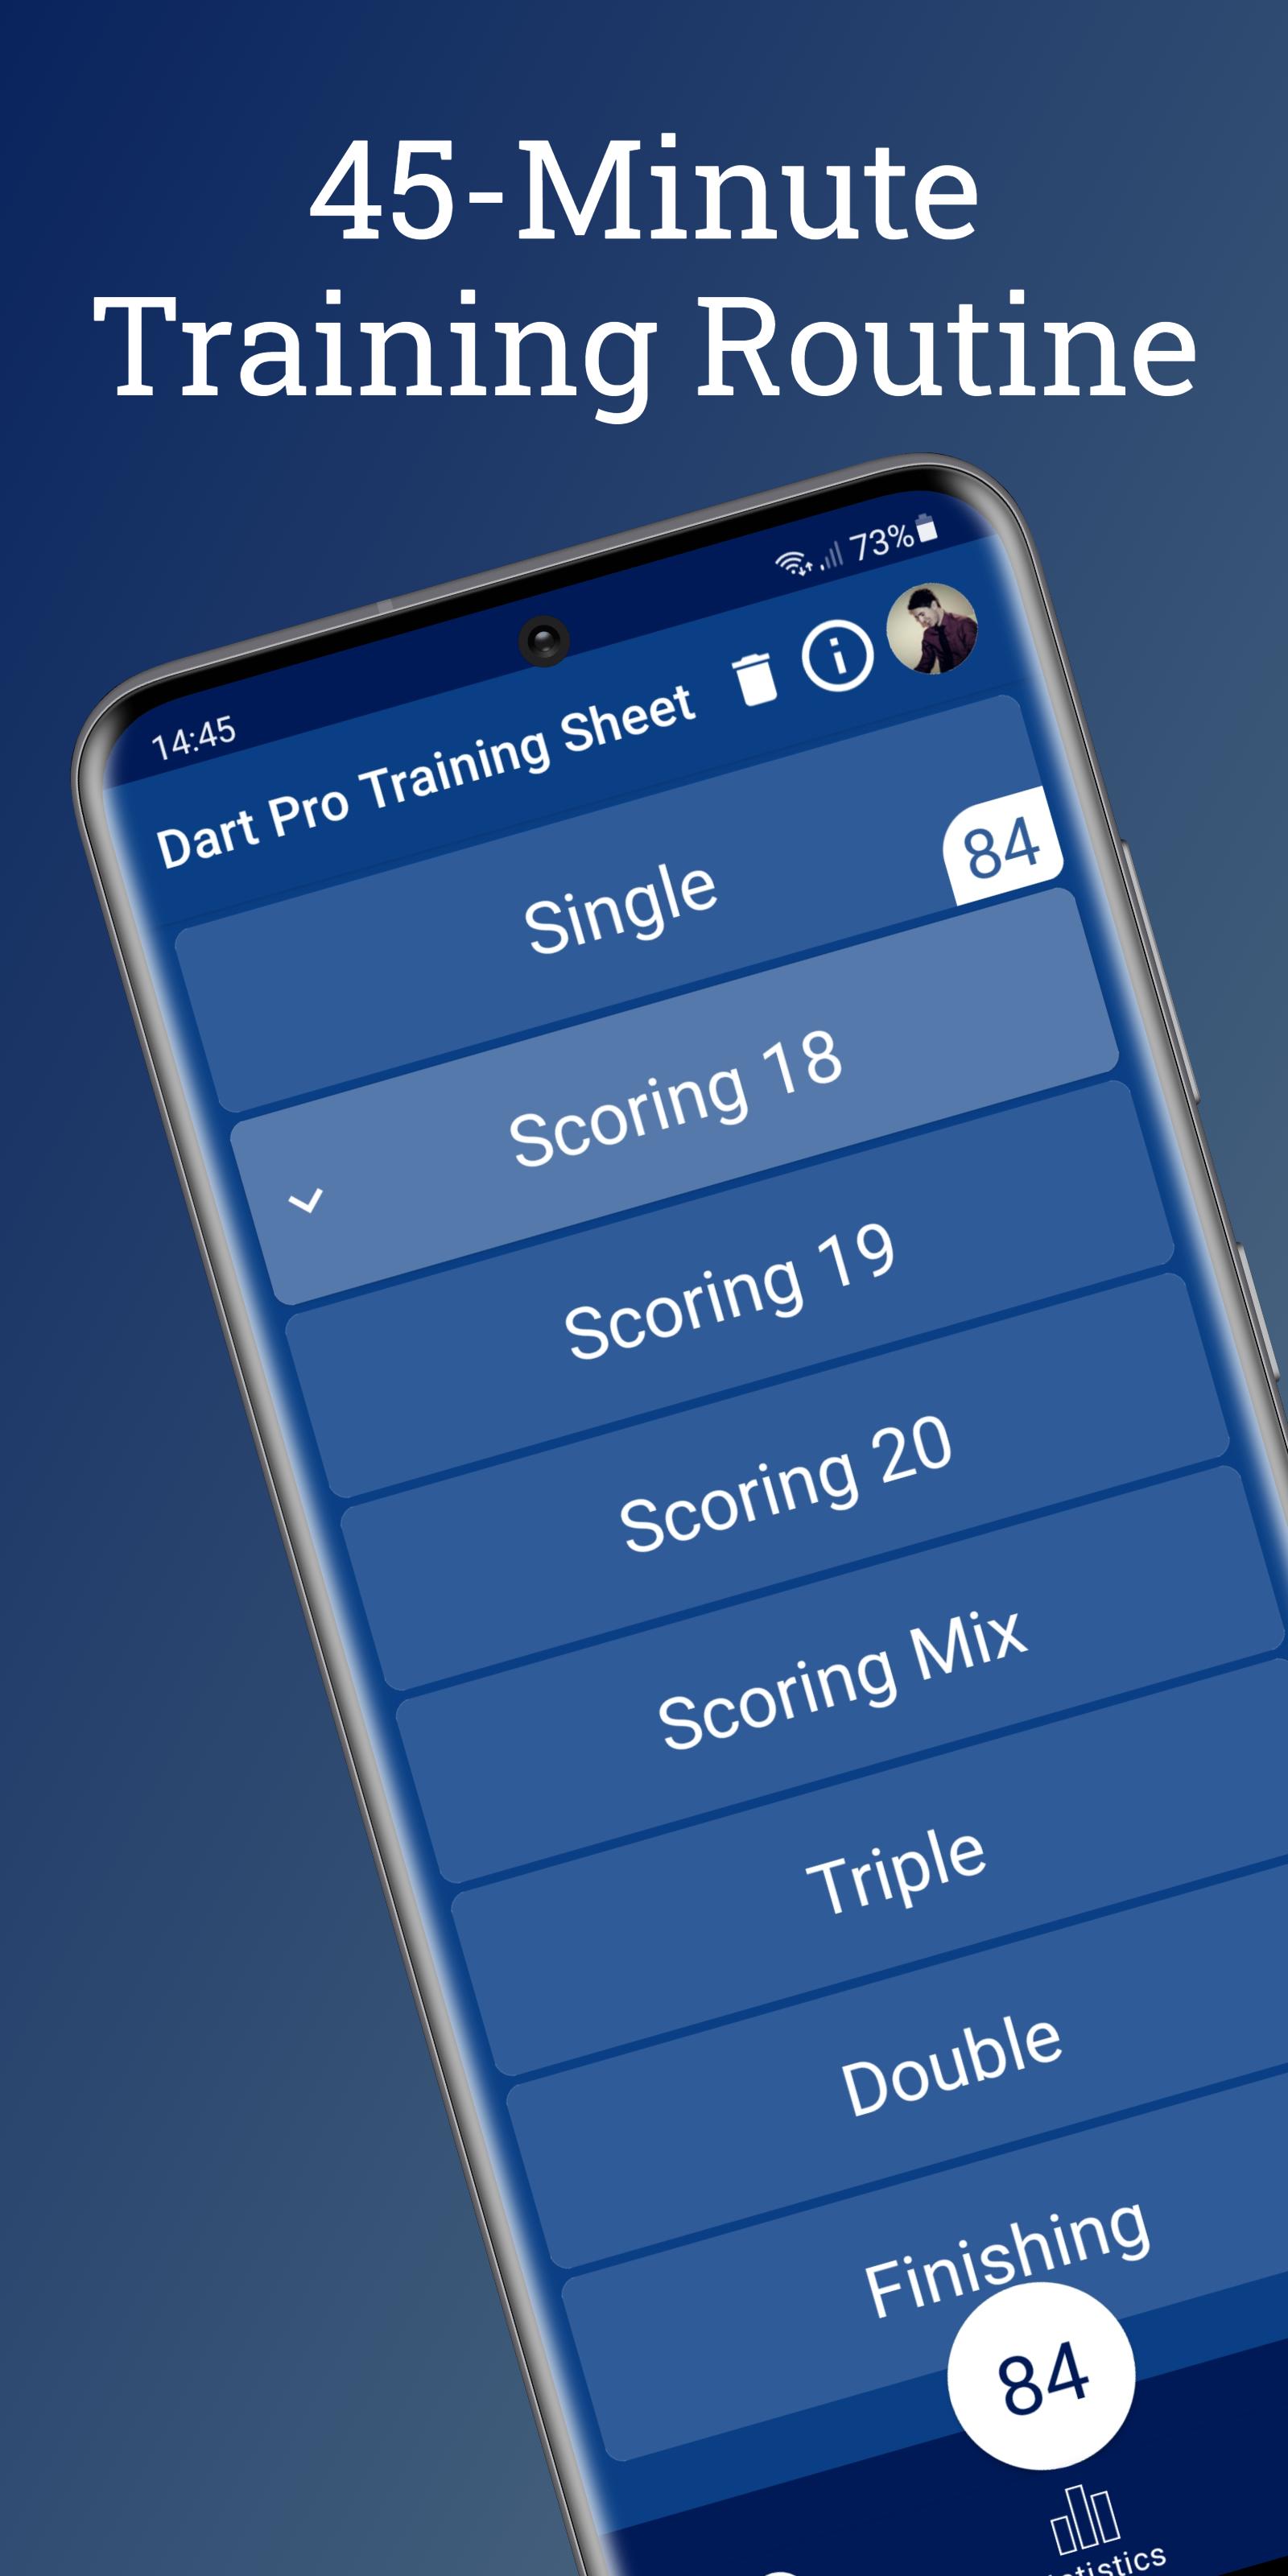 Dart Pro Training Sheet for Android - APK Download